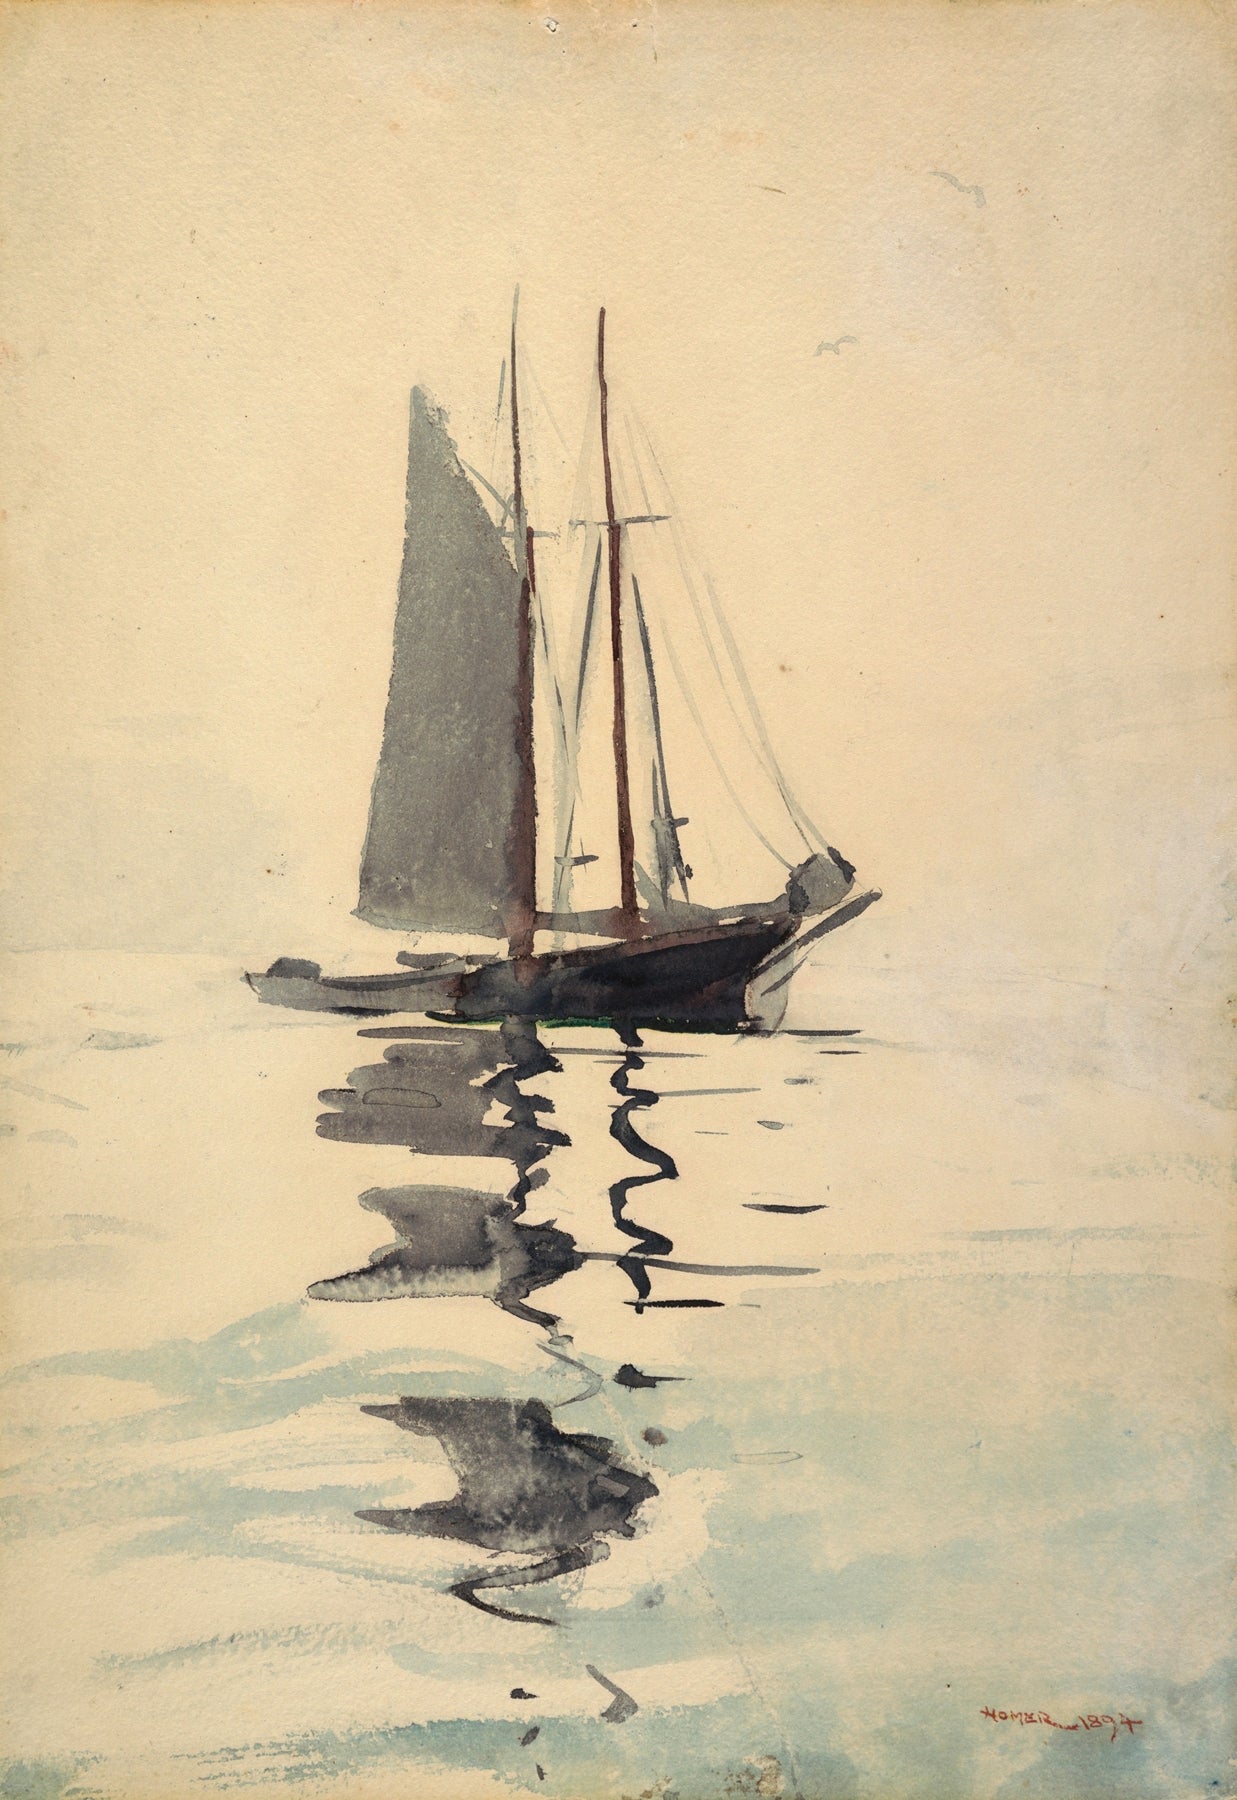 Two–masted Schooner with Dory (1890s) | Winslow Homer prints Posters, Prints, & Visual Artwork The Trumpet Shop   